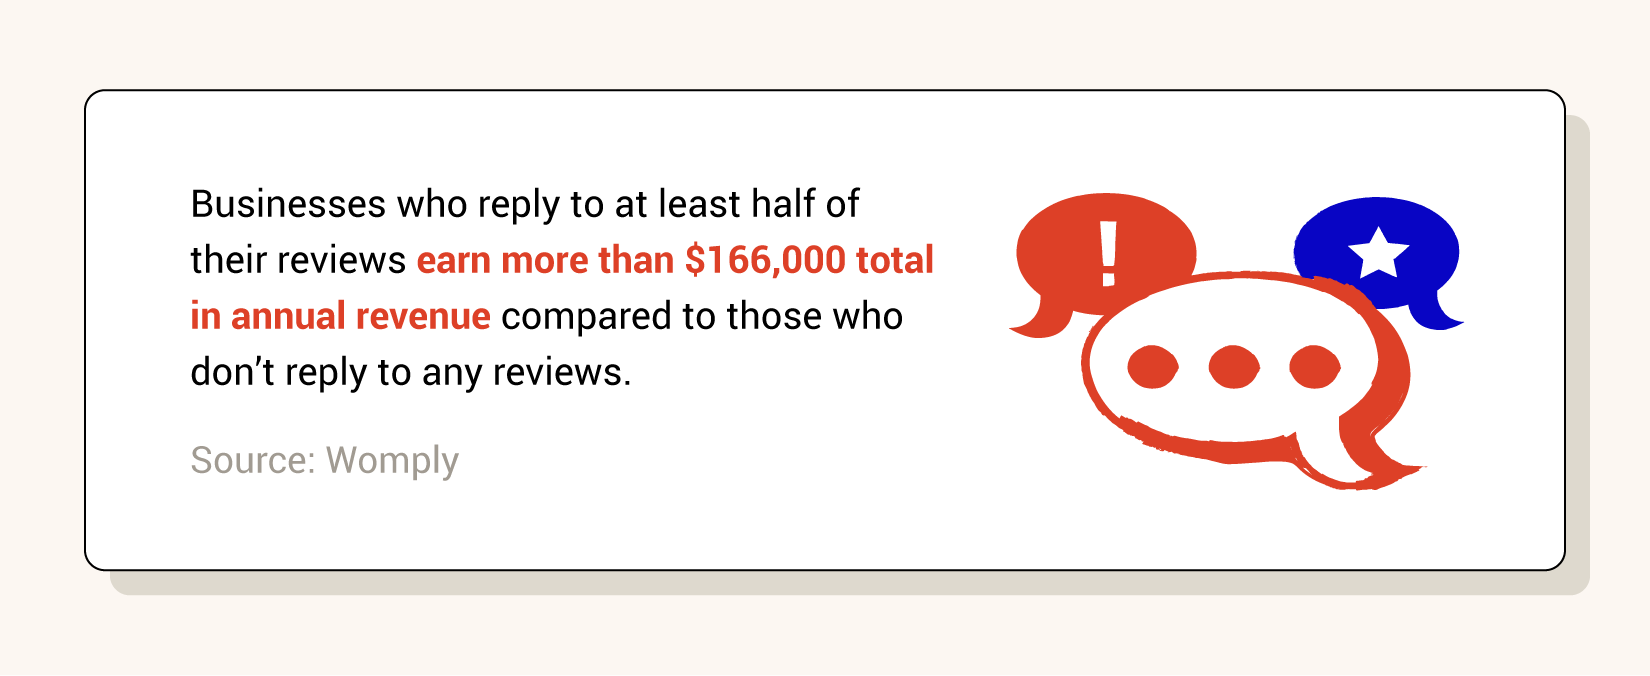 "Businesses who reply to at least half of their reviews earn more than $166,000 total in annual revenue compared to those who don't reply to any reviews." Source: Womply